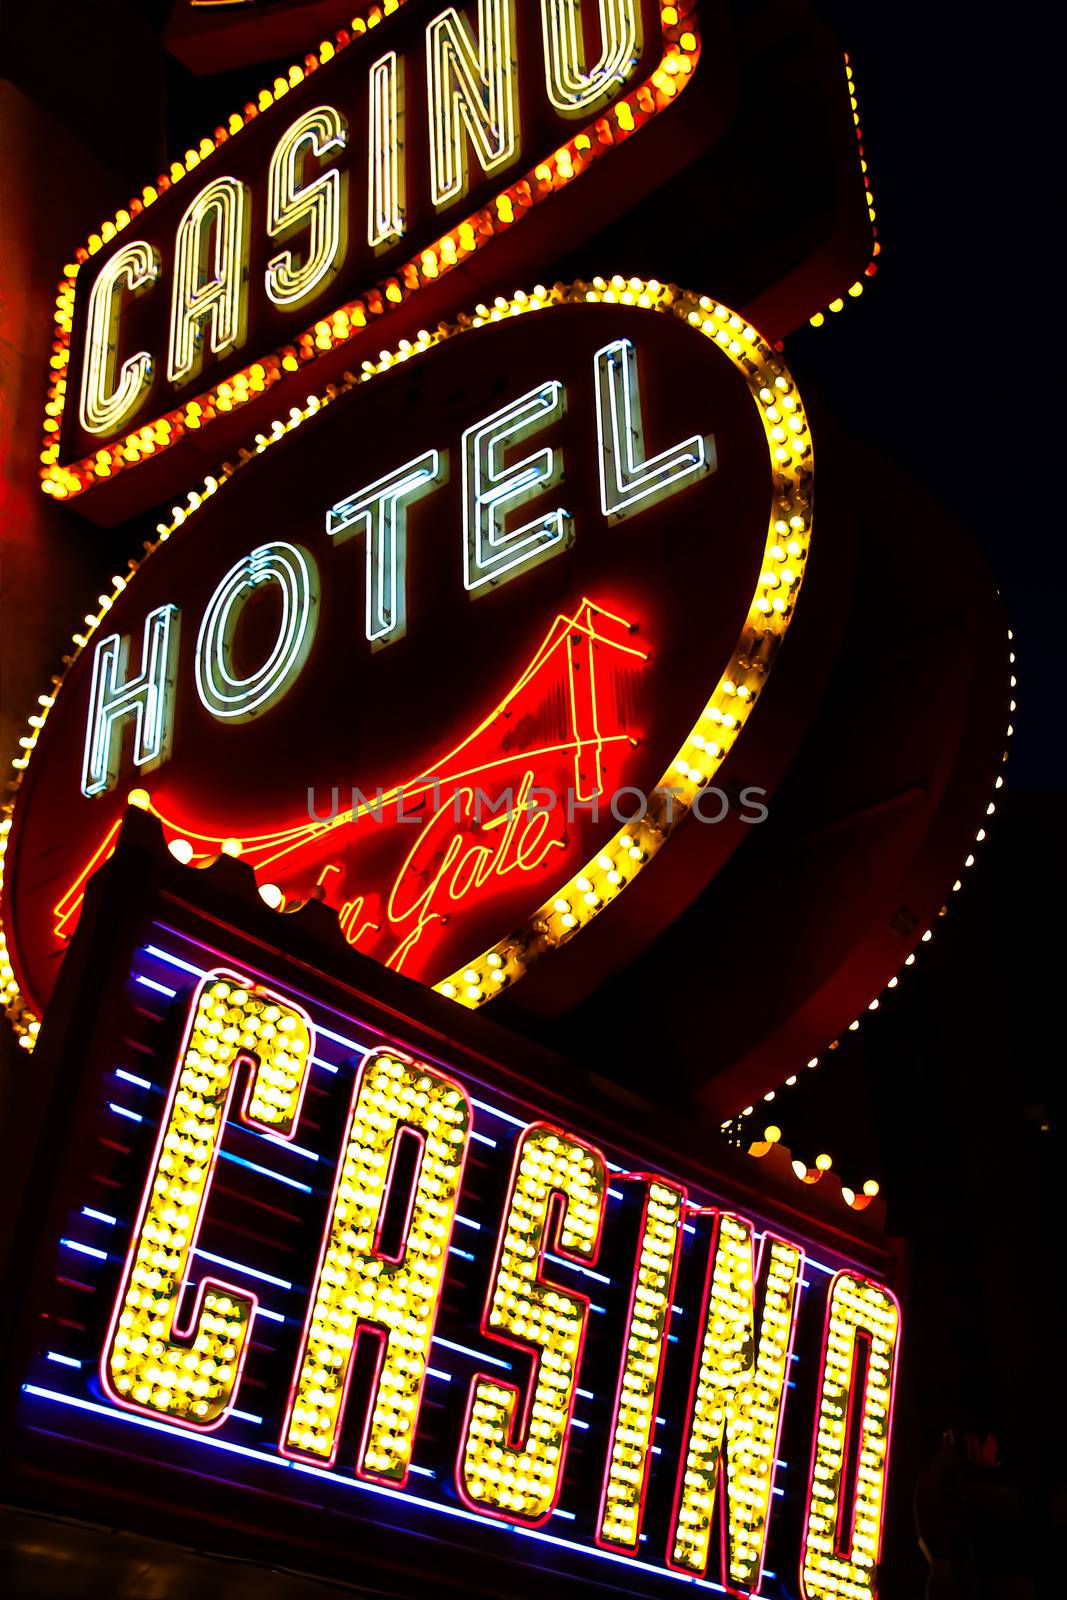 LAS VEGAS,NV - Sep 16, 2018: Golden Gate Hotel & Casino sign illuminated by night in Las Vegas. It is the oldest and smallest hotel located on the Fremont Street Experience. by USA-TARO